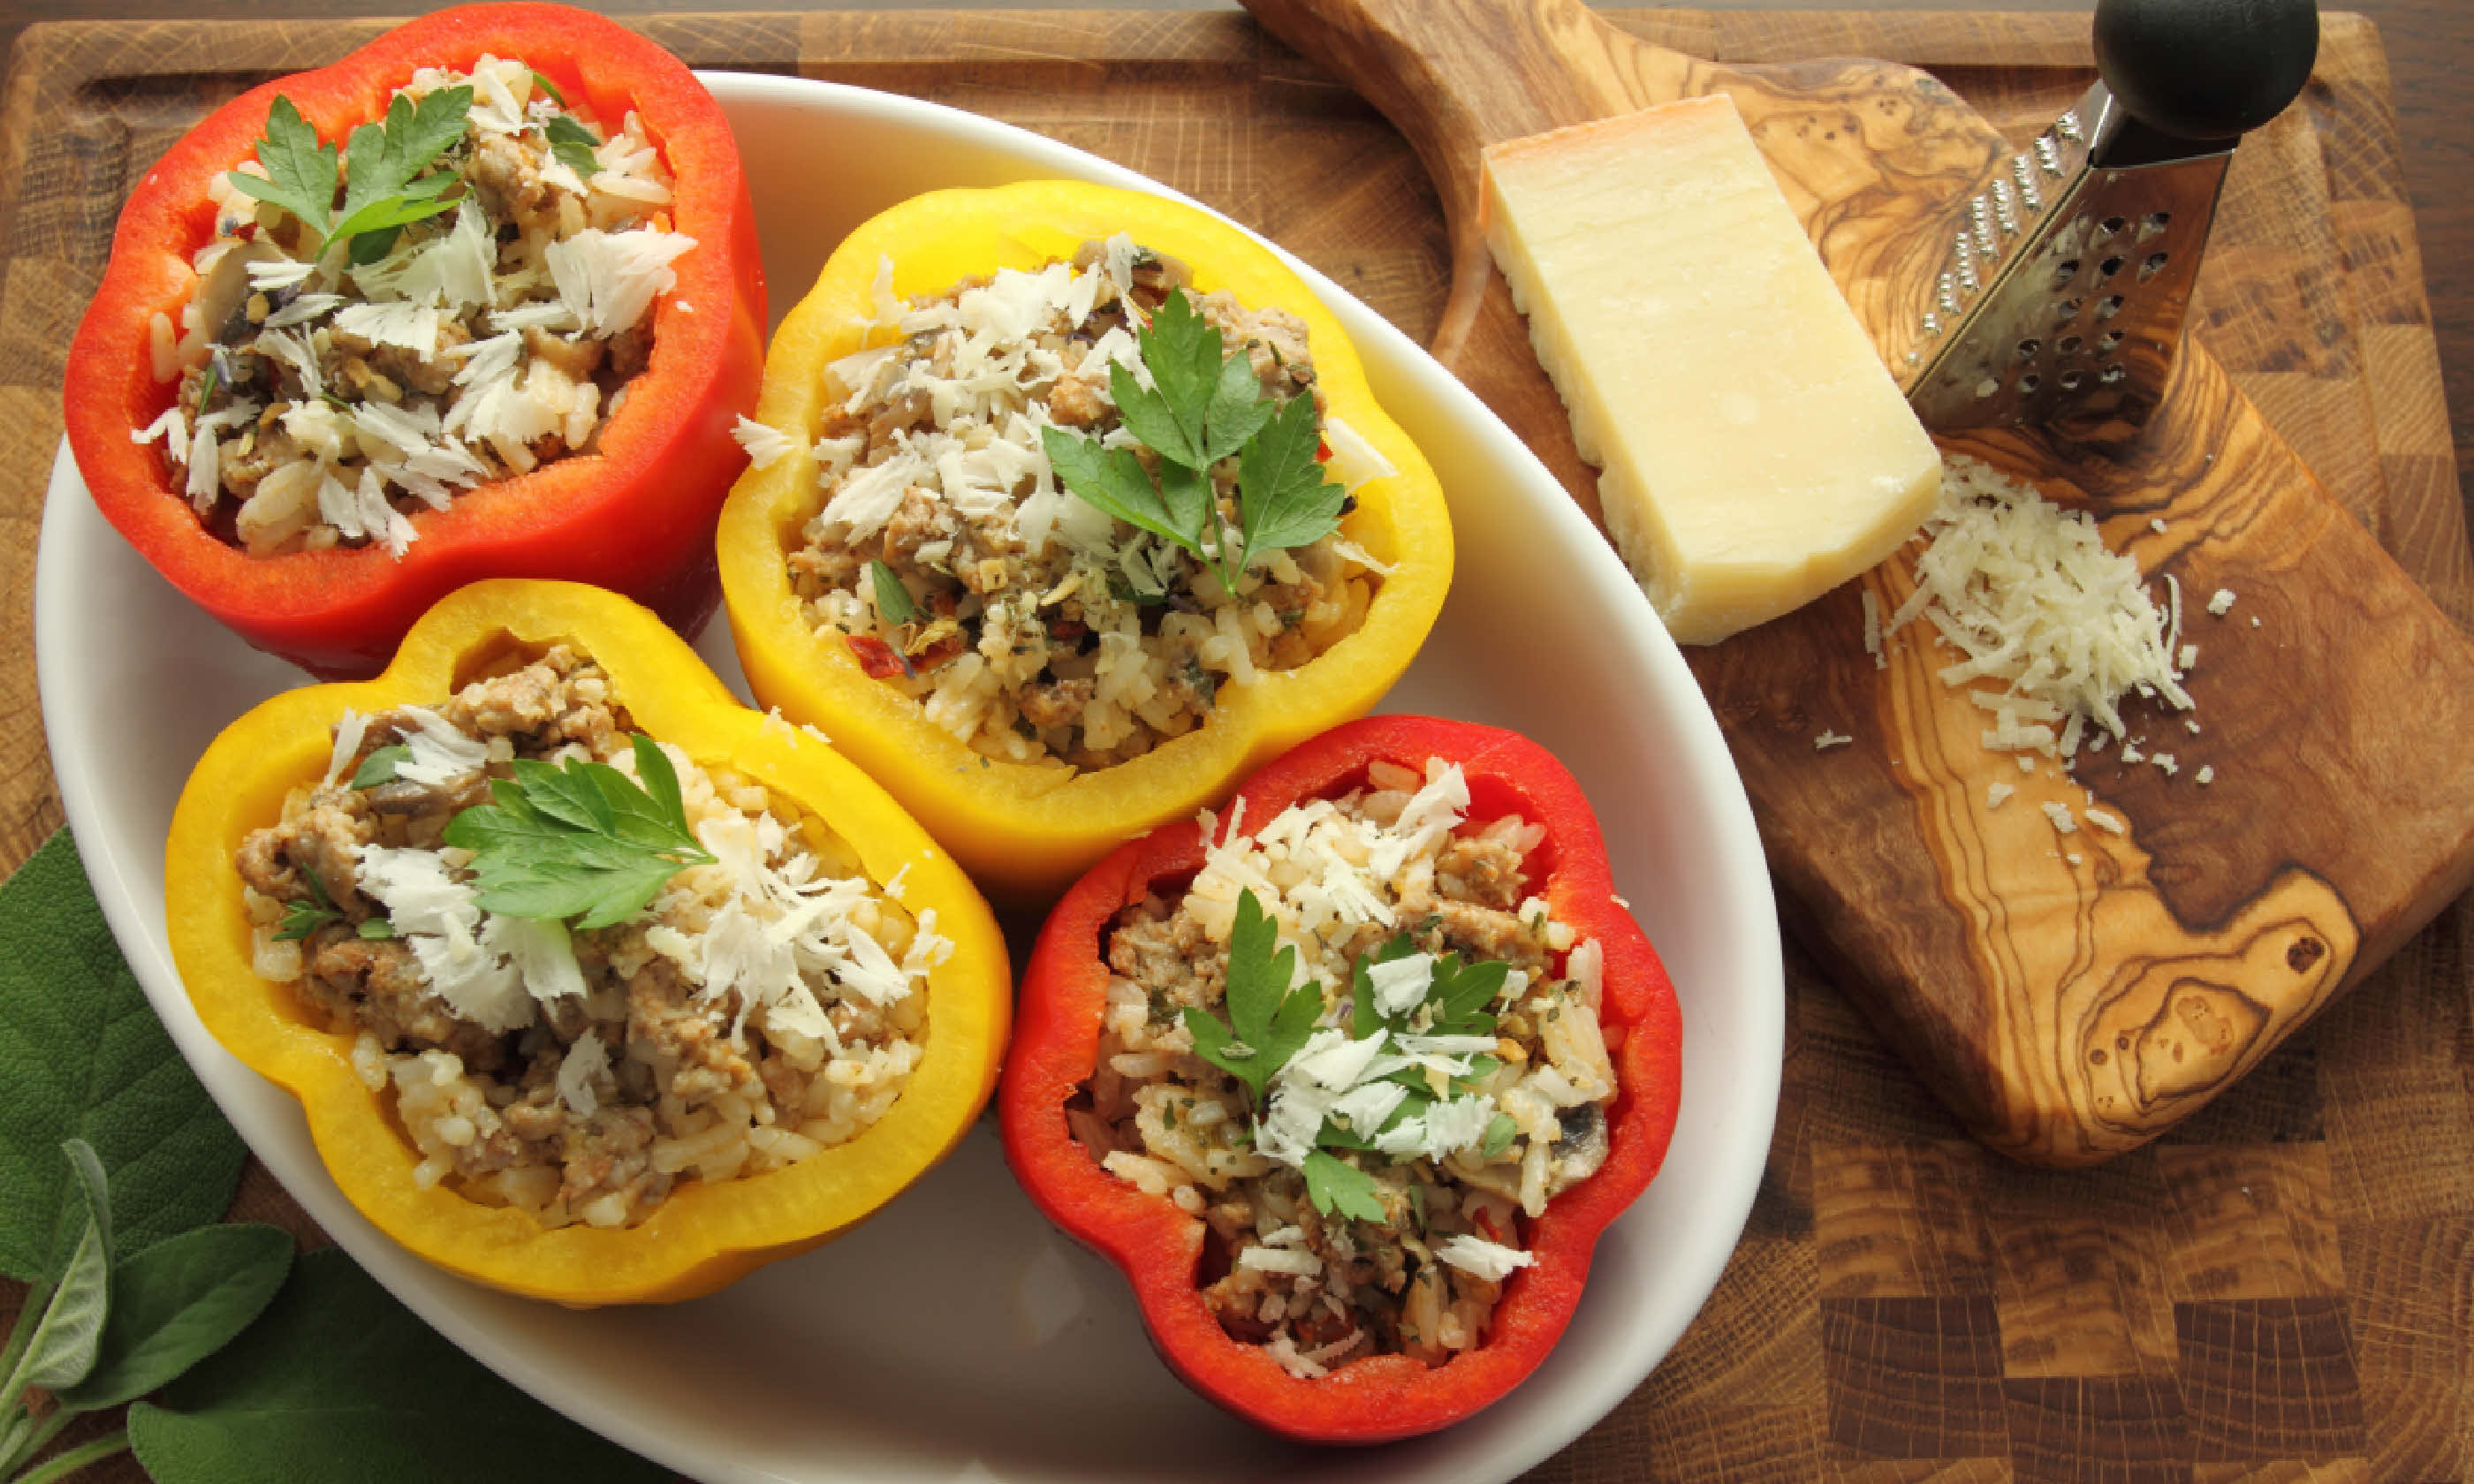 Main image: Stuffed paprika with meat, rice and vegetables (Shutterstock: see credit below)